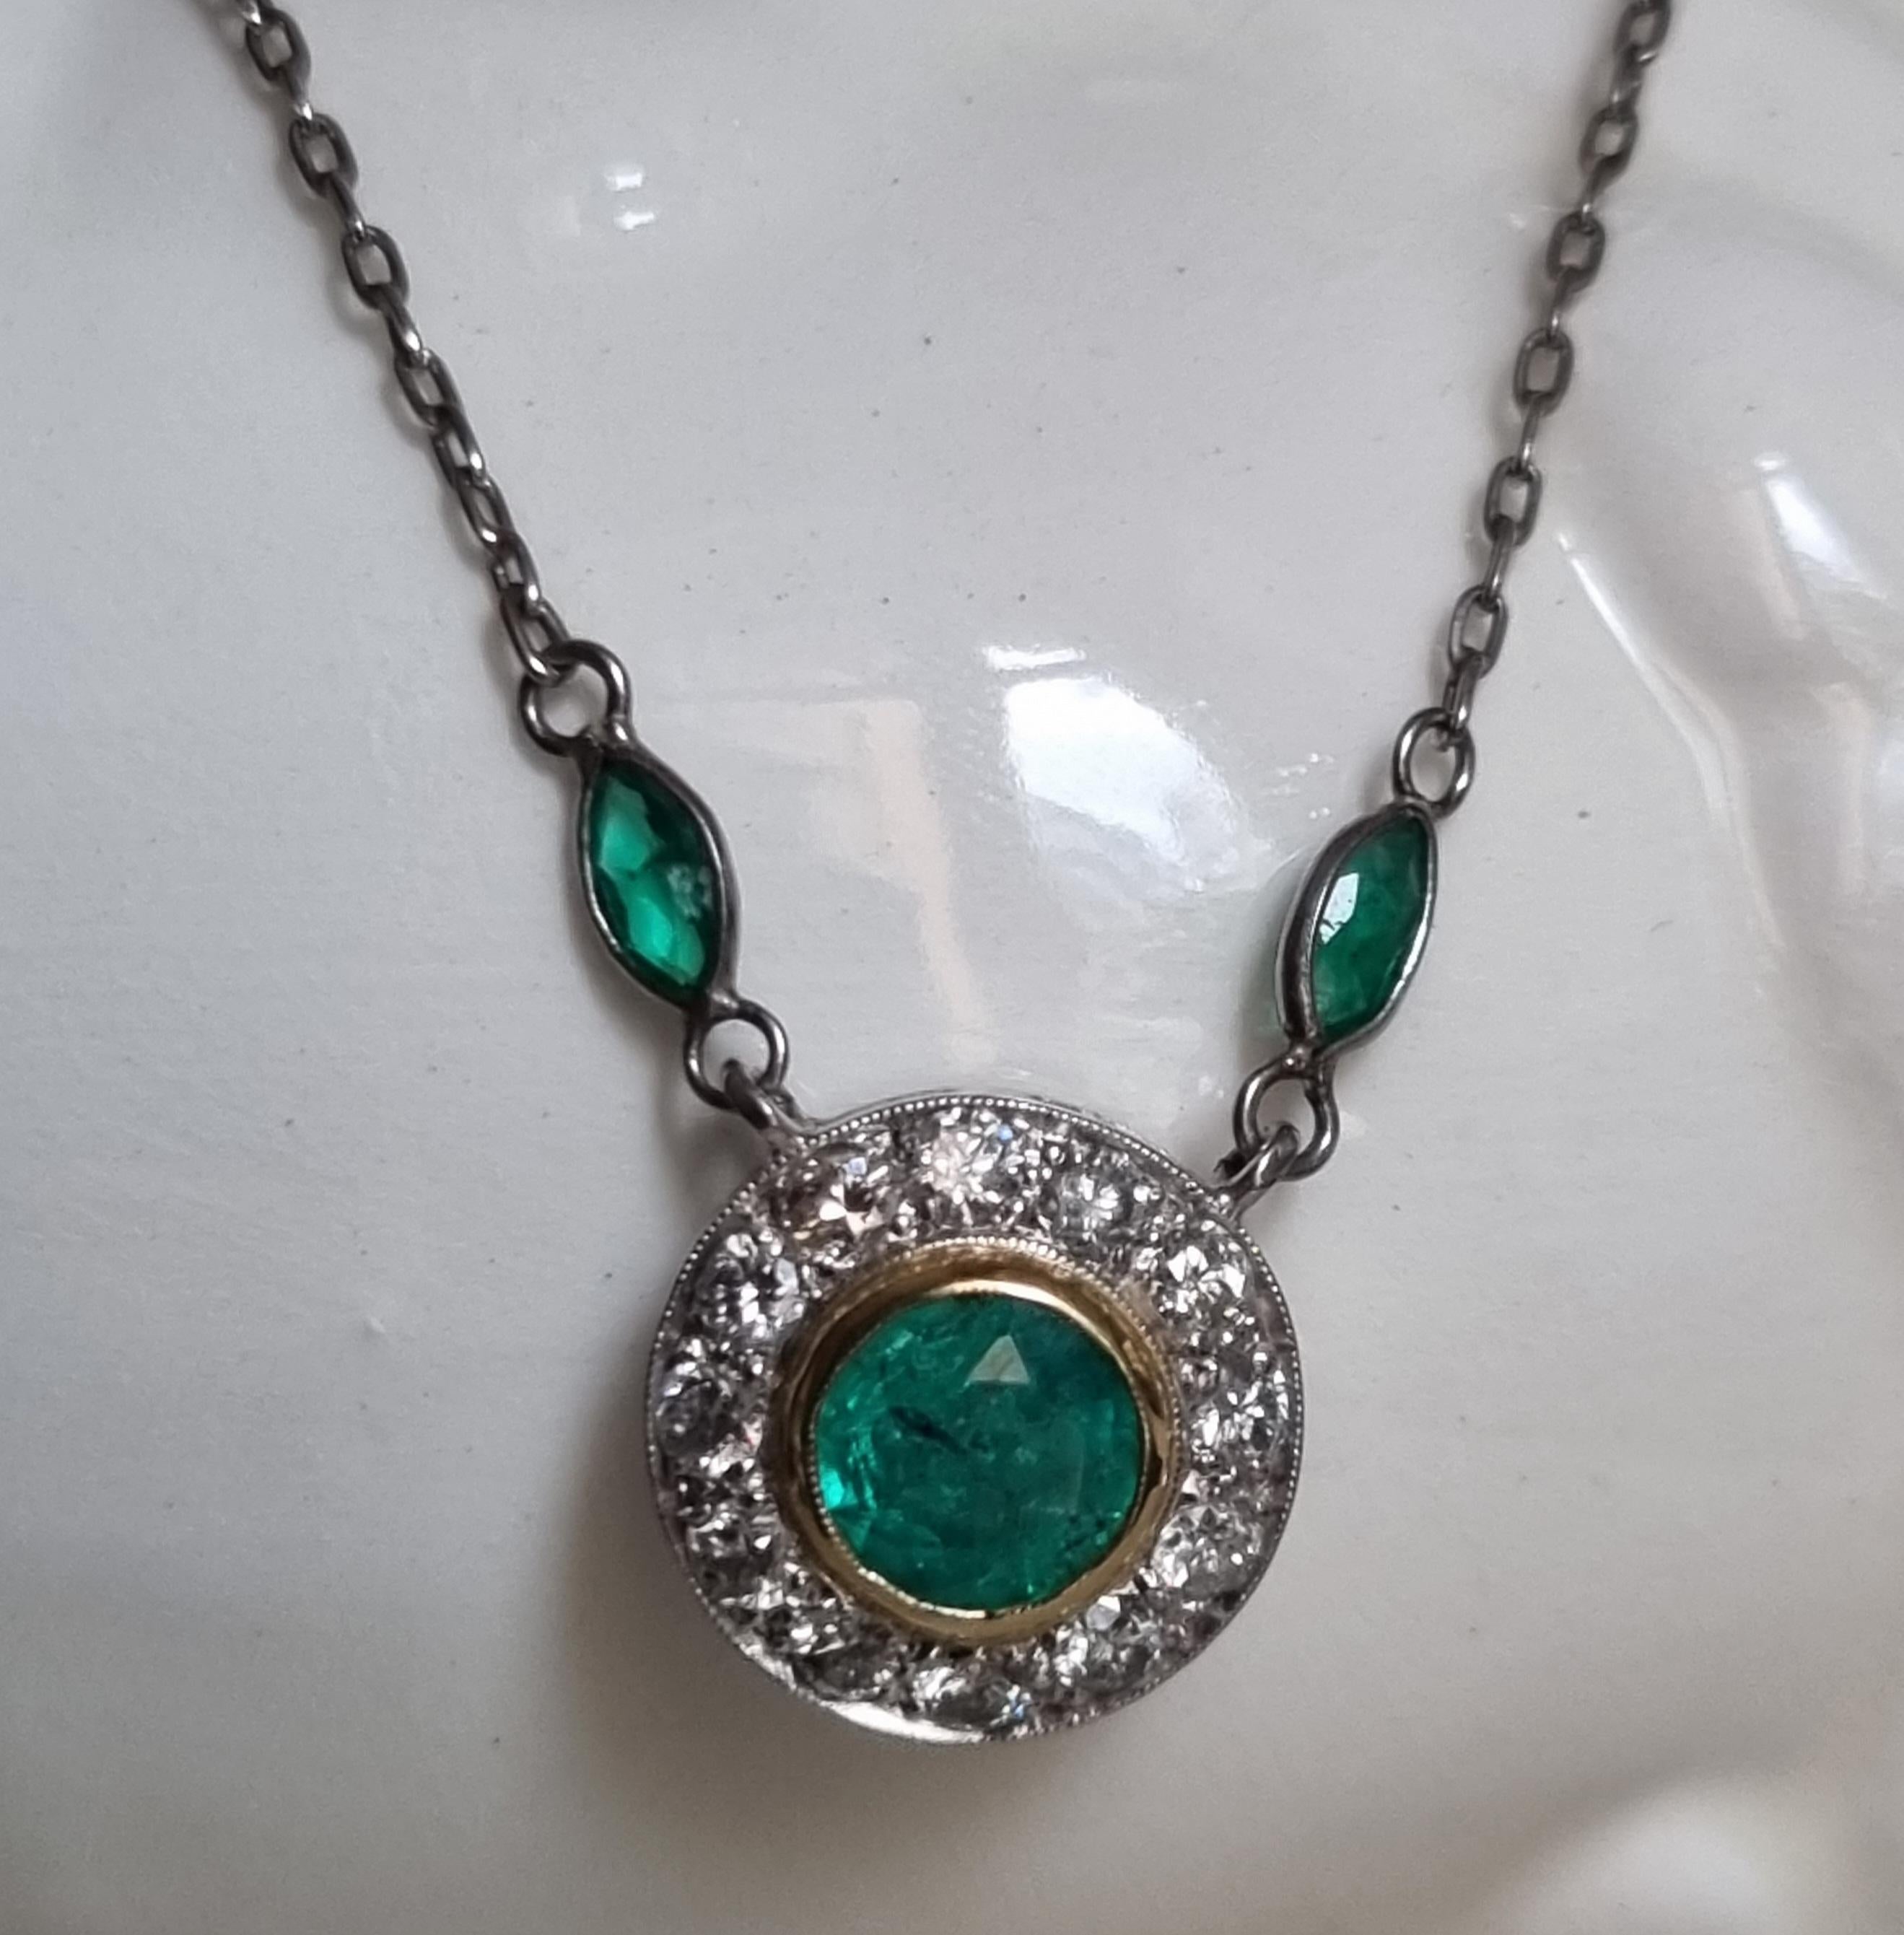 Edwardian Style  Emerald  and Diamond  Pendant & Chain.
A bright neon green and lovely .85 carat emerald (7mmX3.65mm), set in a yellow gold bezel and surrounded by a round frame of Swiss-cut 12 diamonds. Total diamond weight - .60 carat (color I/J;